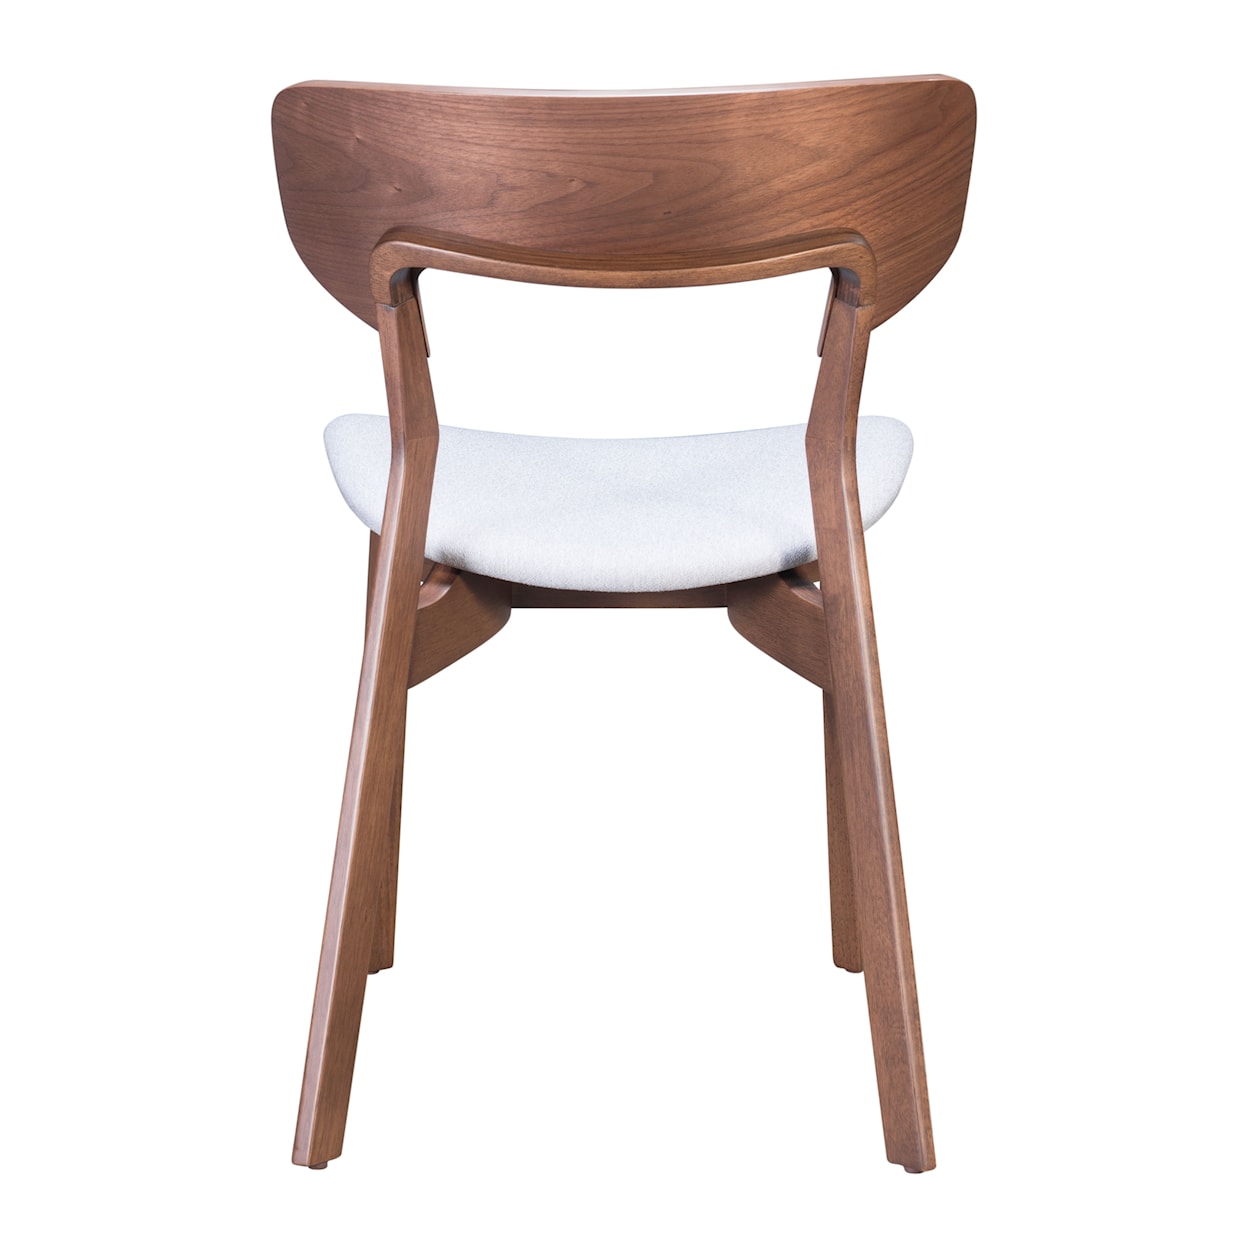 Zuo Russell Dining Chair Set